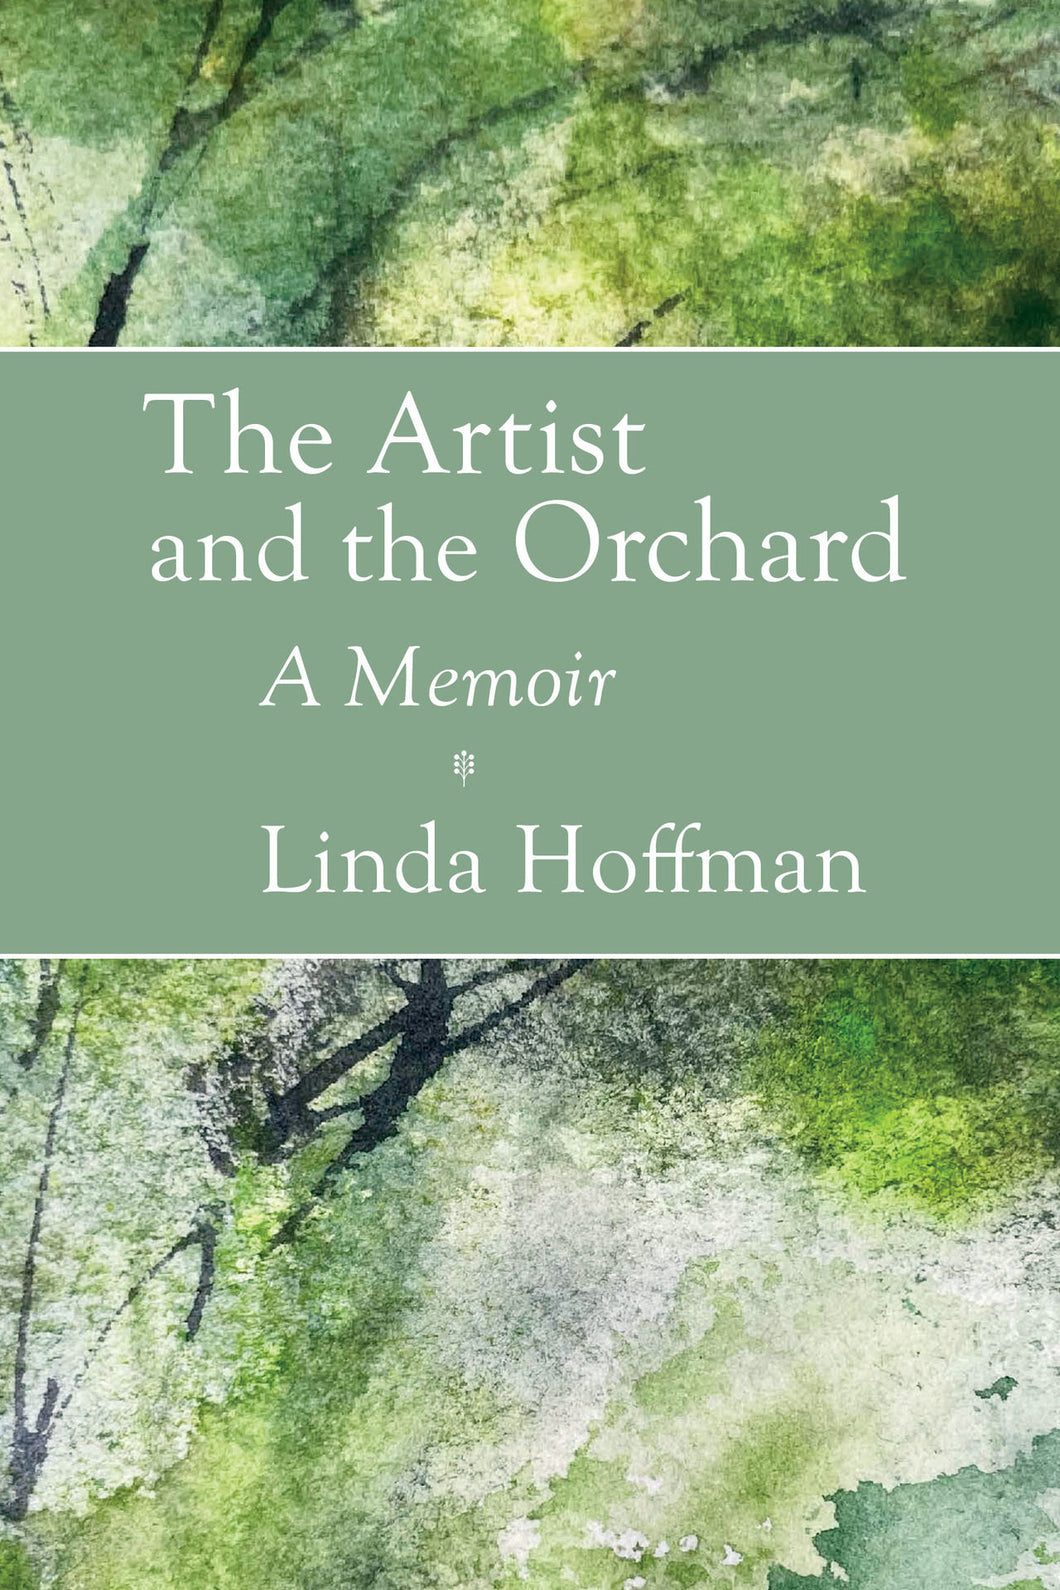 The Artist and the Orchard: A Memoir